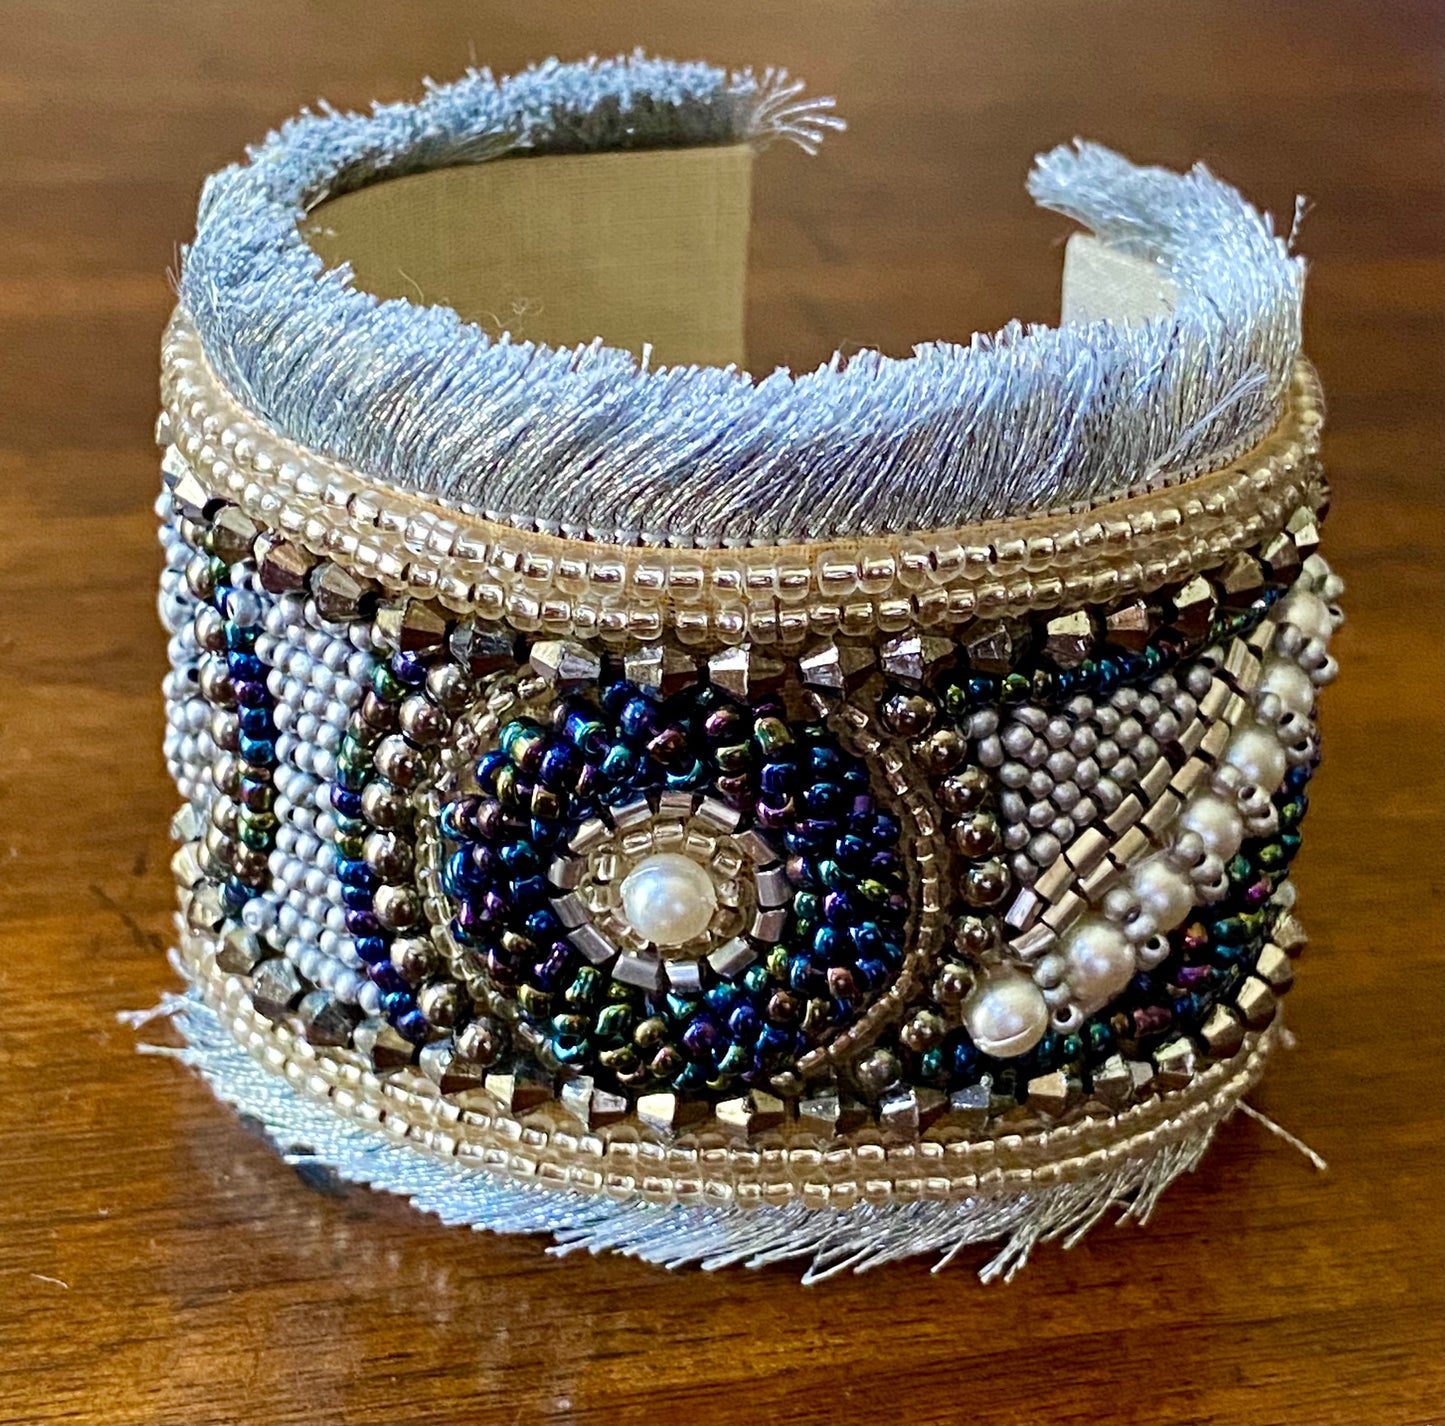 Ladies' Handcrafted Bead and Sequin Cuff